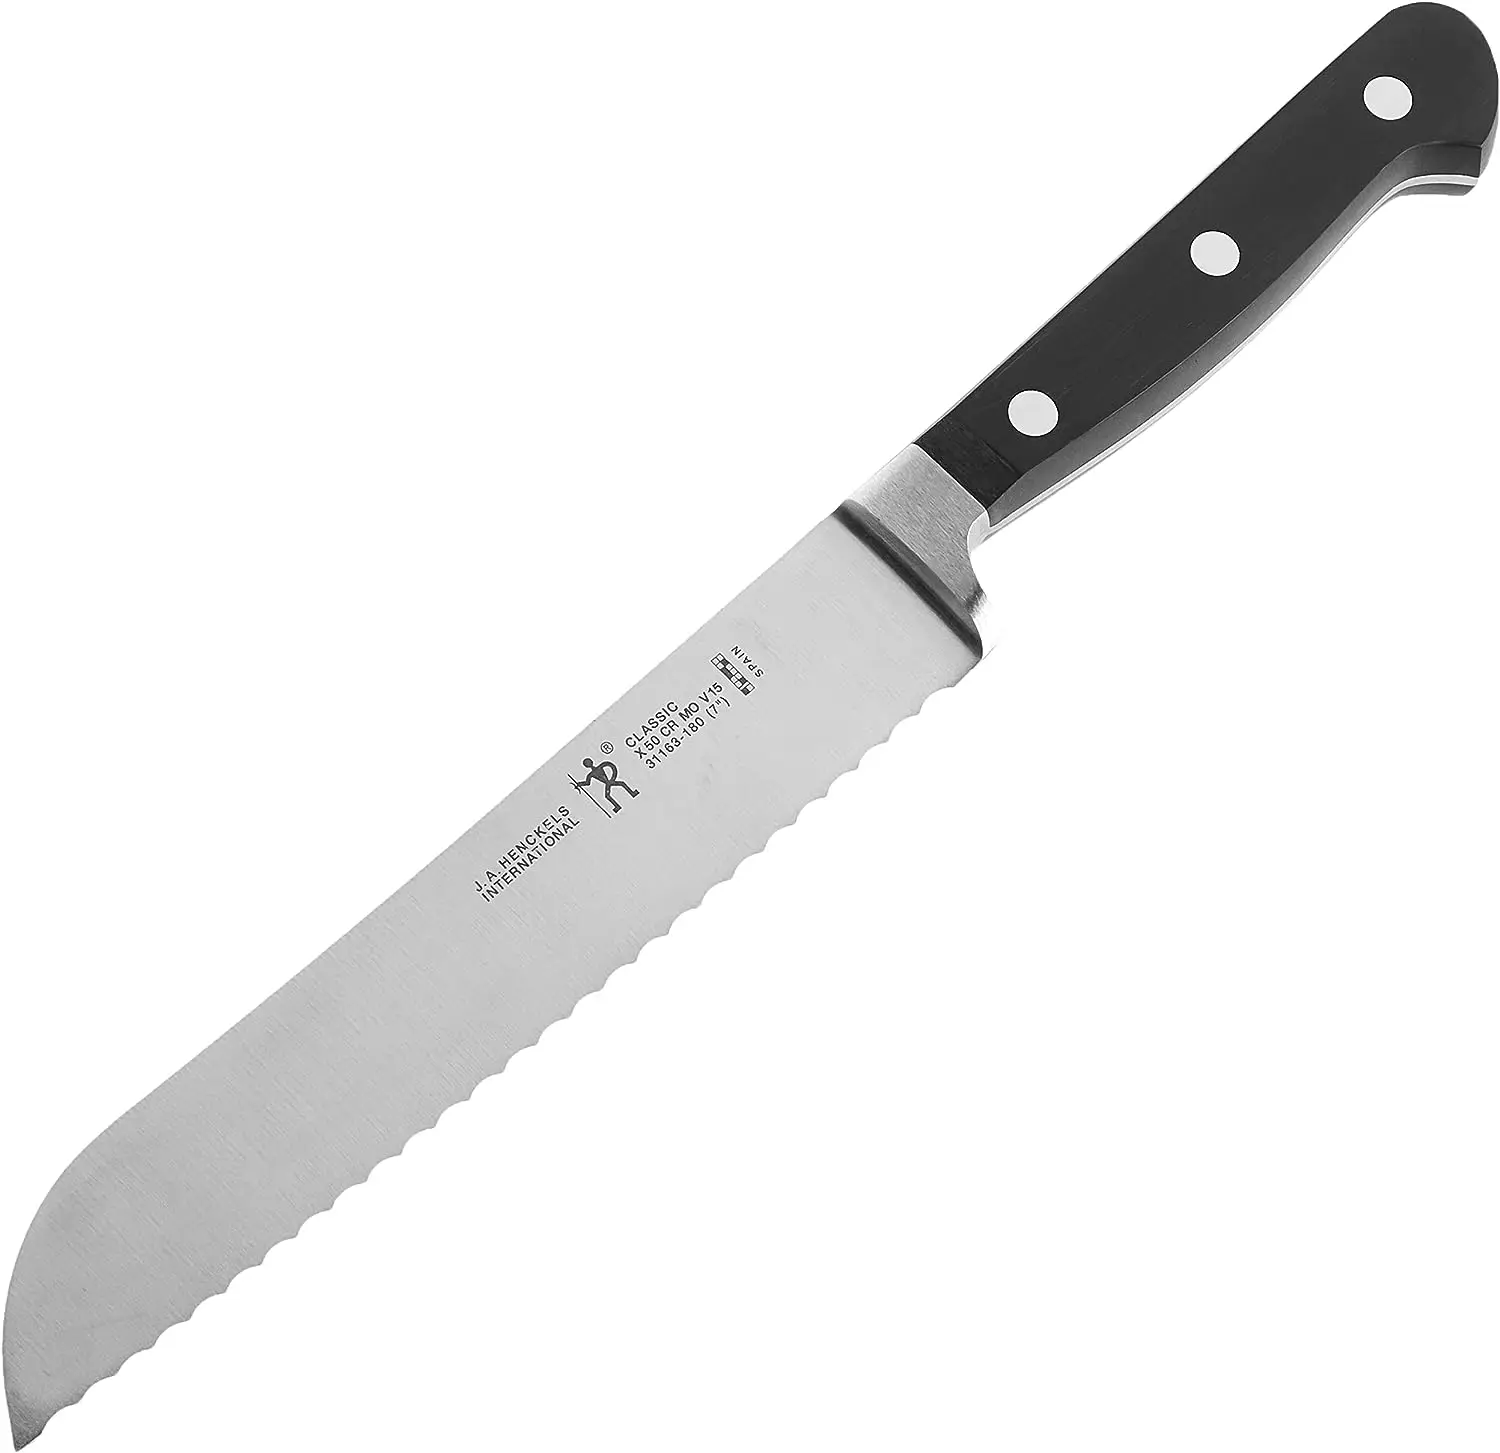 

Classic -Sharp 7-inch Bread Knife, Cake Knife , German Engineered Informed by 100+ Years of Mastery, Black